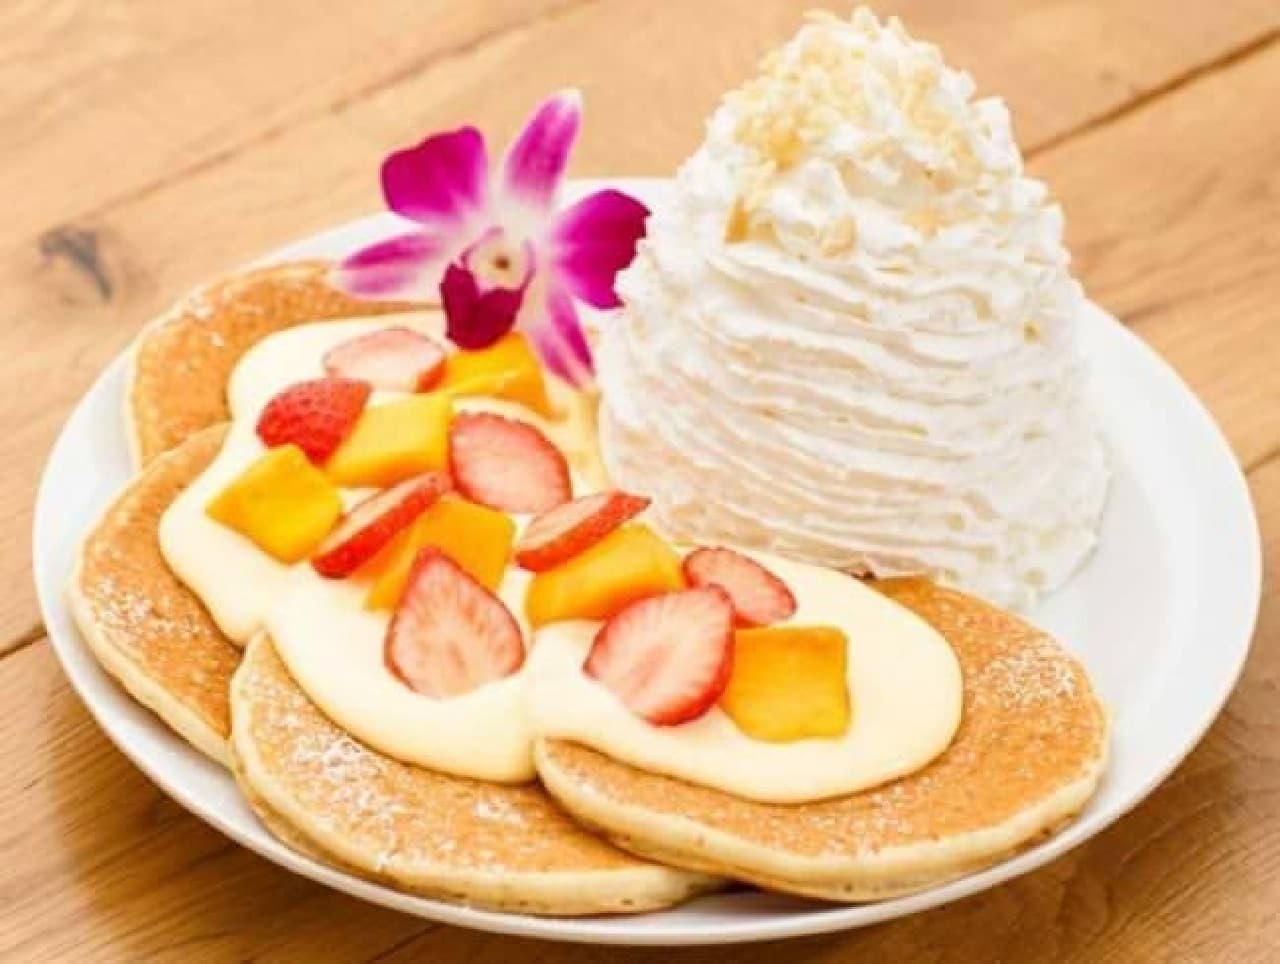 "Tochiotome and Mango Pancakes"